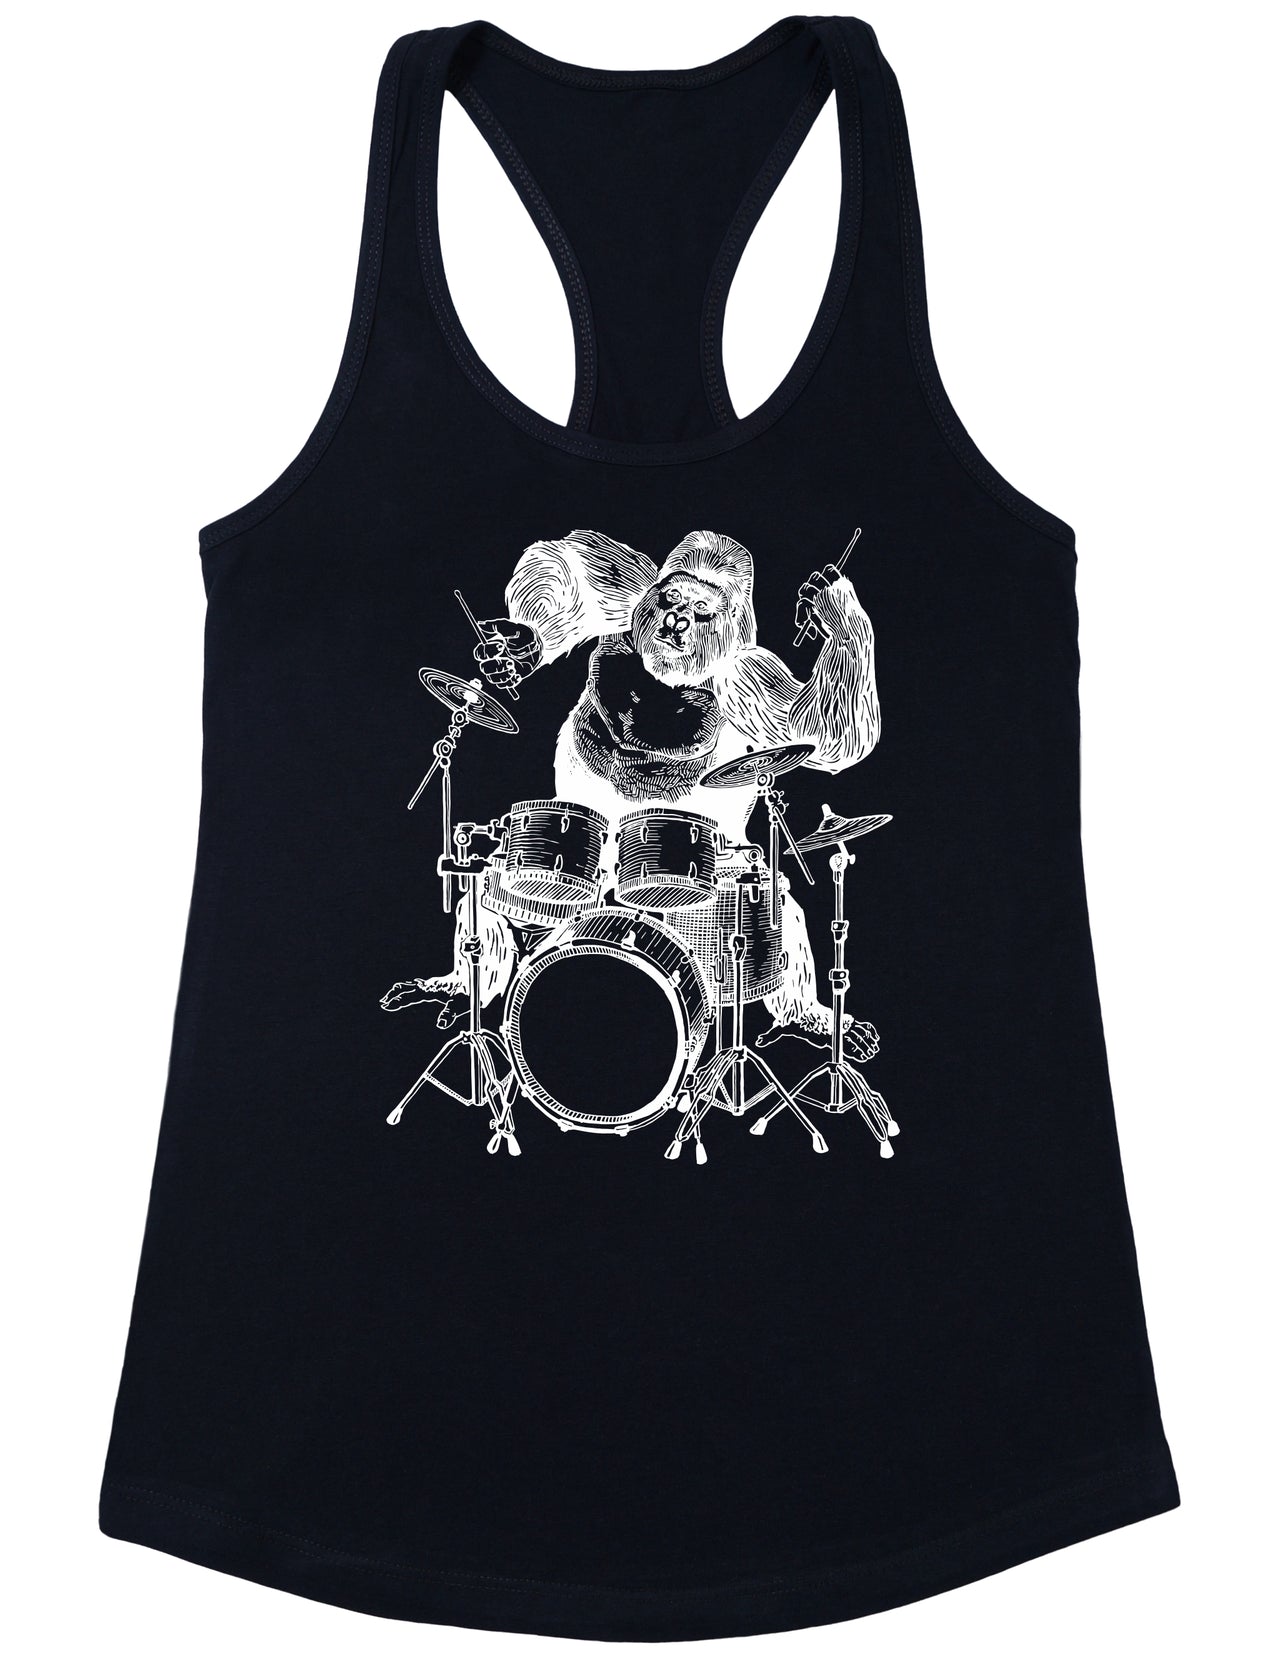 SEEMBO Gorilla Playing Drums Women's Poly-Cotton Tank Top